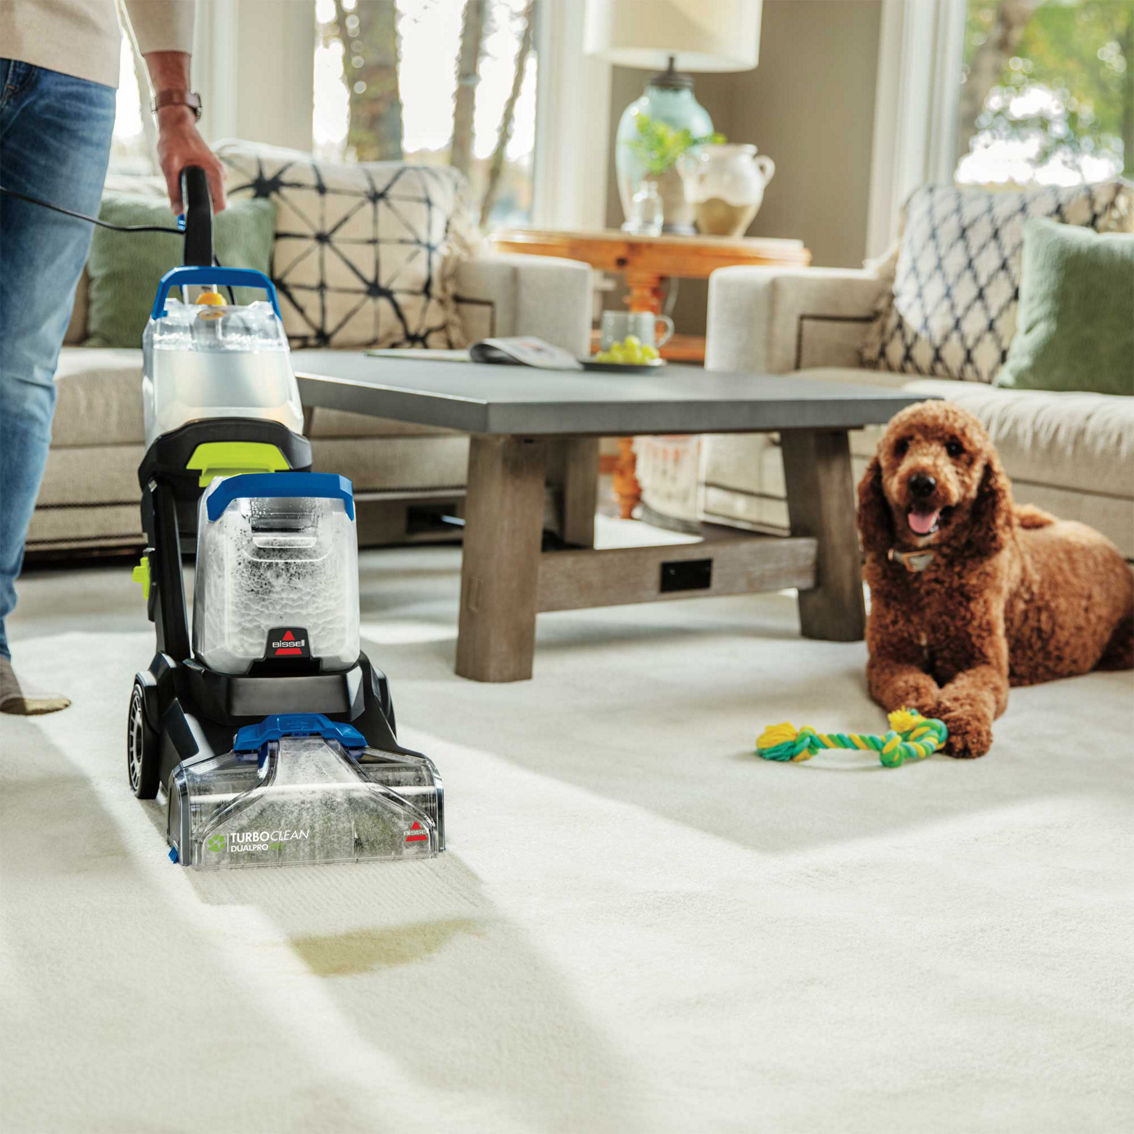 Bissell Turboclean Dualpro Pet Carpet Cleaner